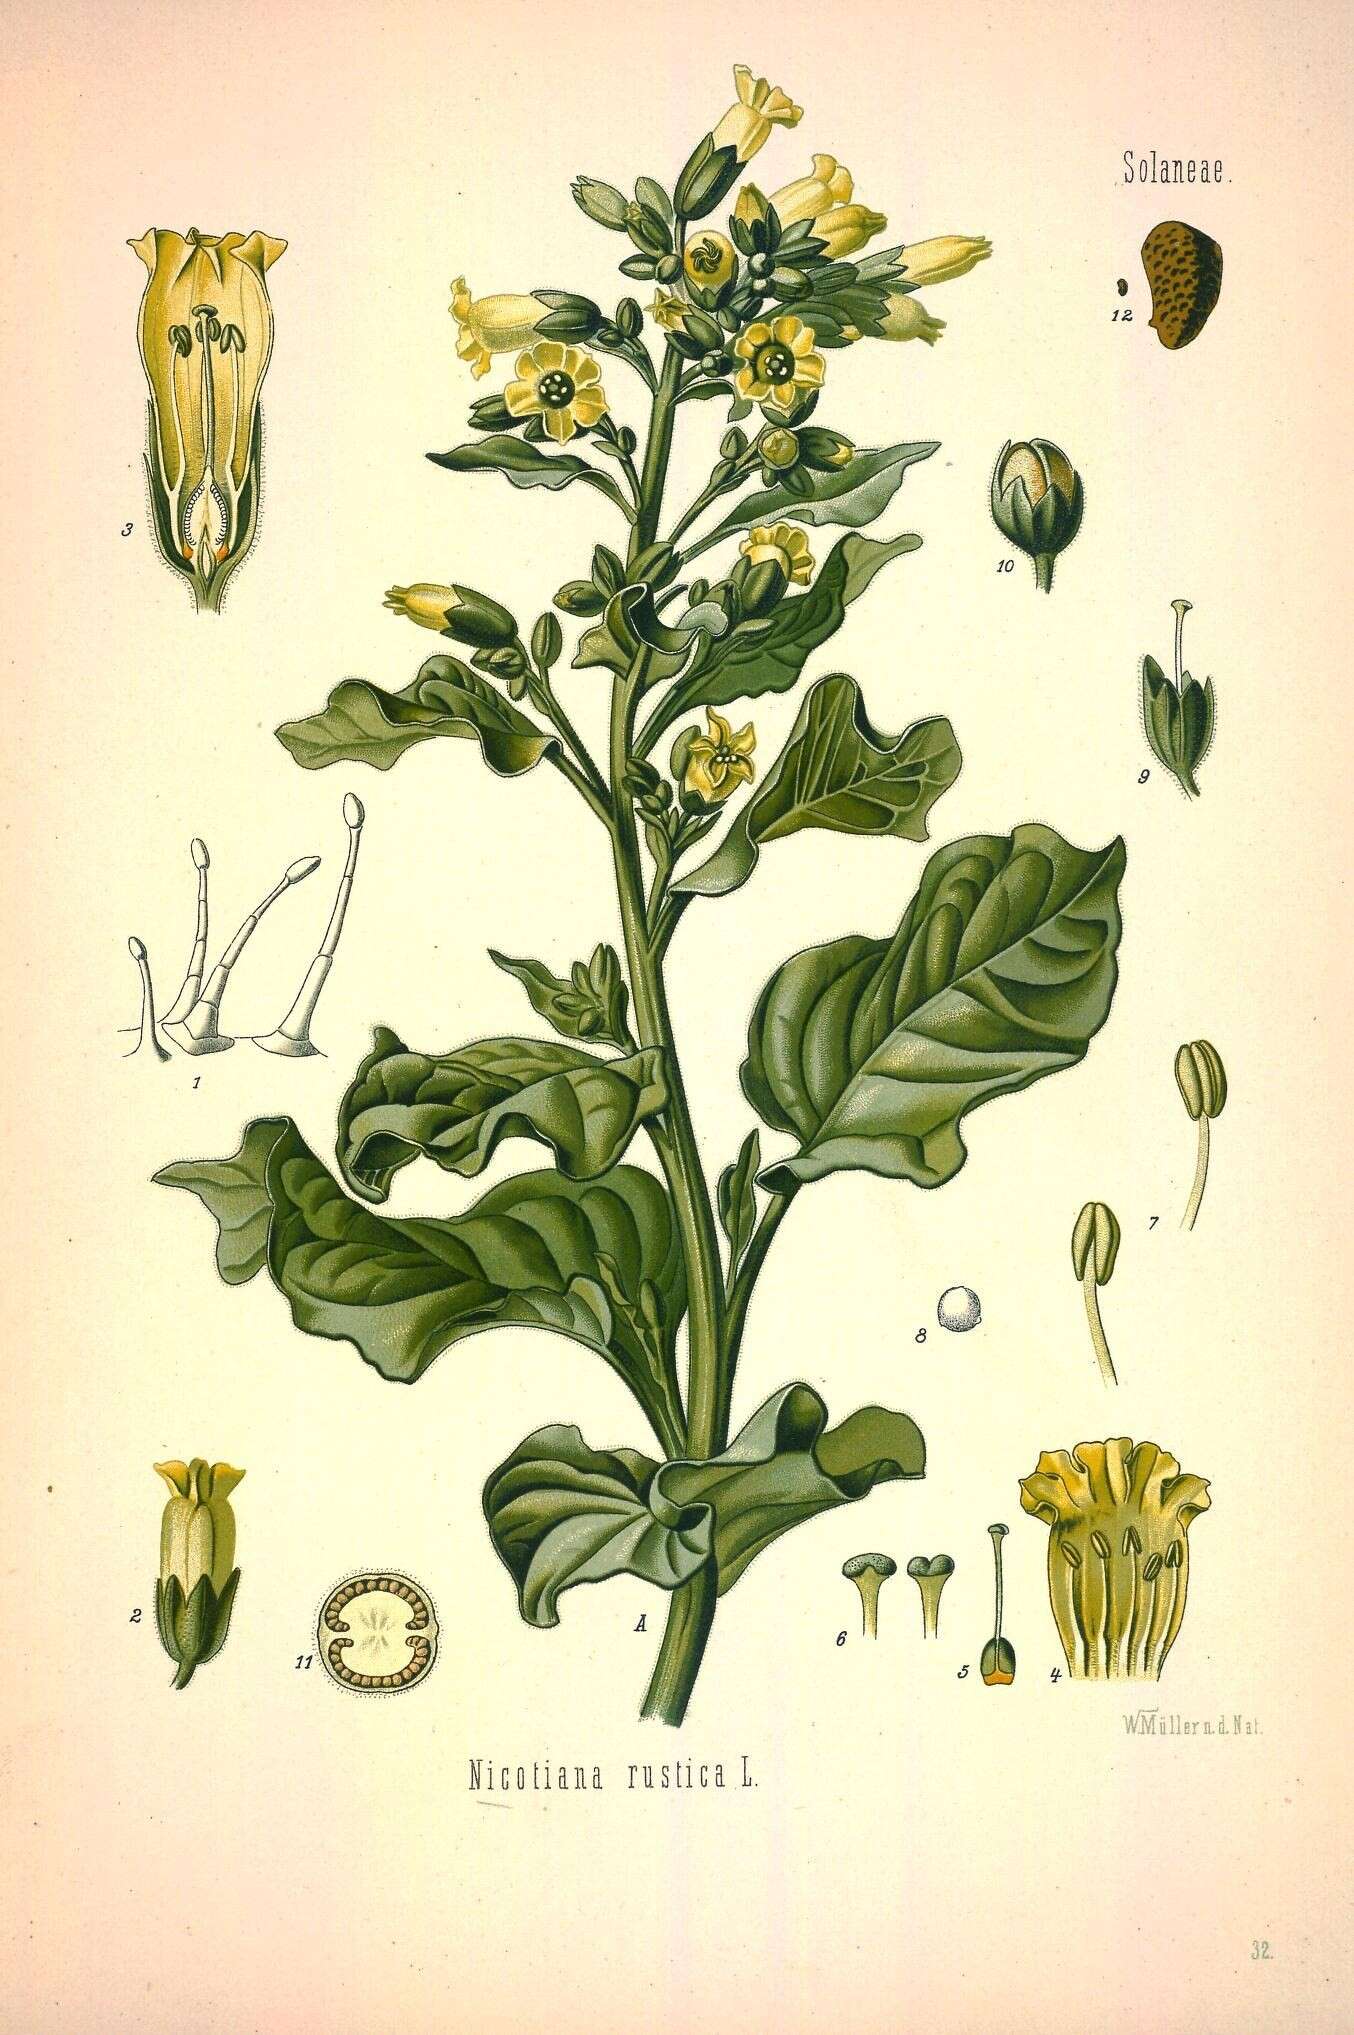 Image of tobacco